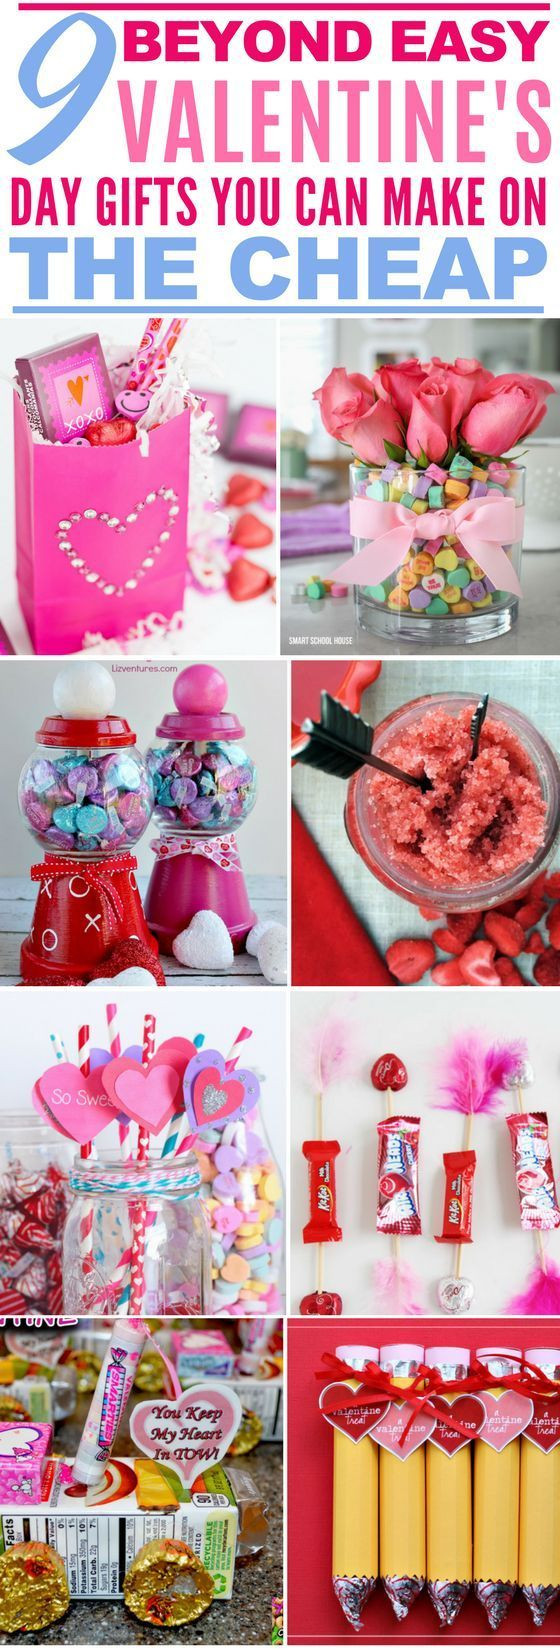 Diy Gift Ideas For Girls
 Valentine s Day Gift Ideas That ll Make Them Feel Loved